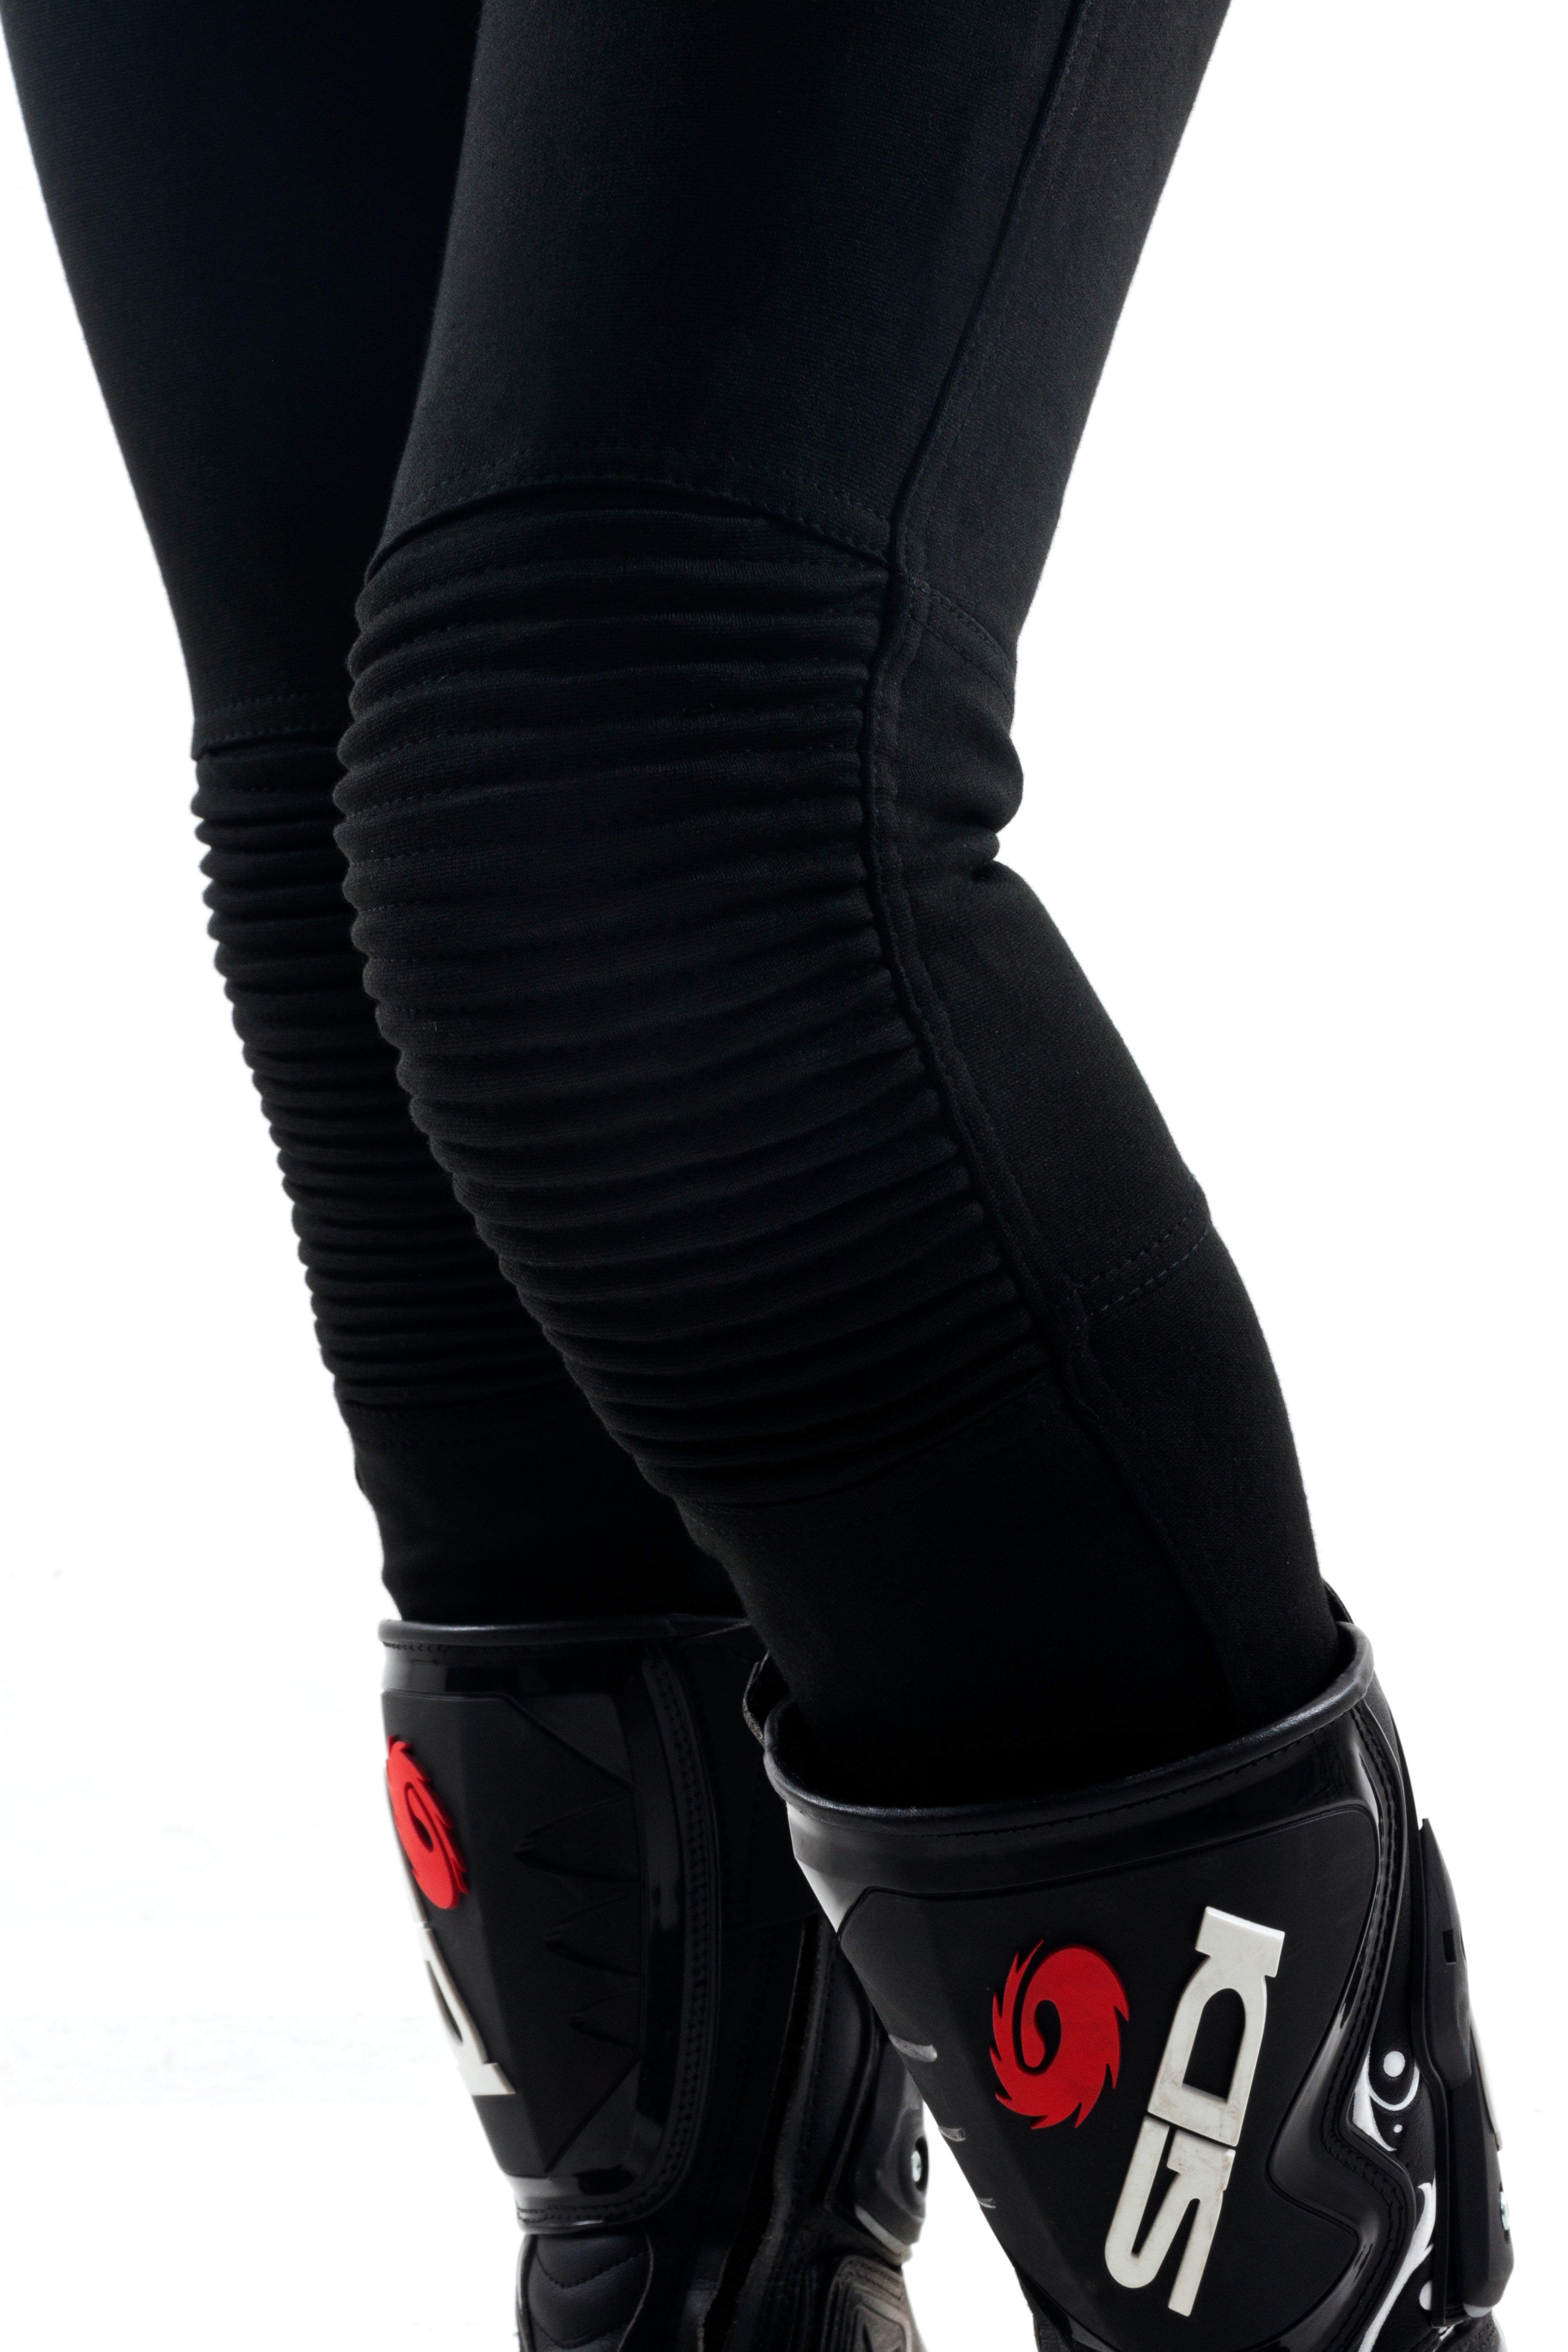 Black women&#39;s motorcycle ribbed knee design leggings  from MotoGirl close up photo of a knee